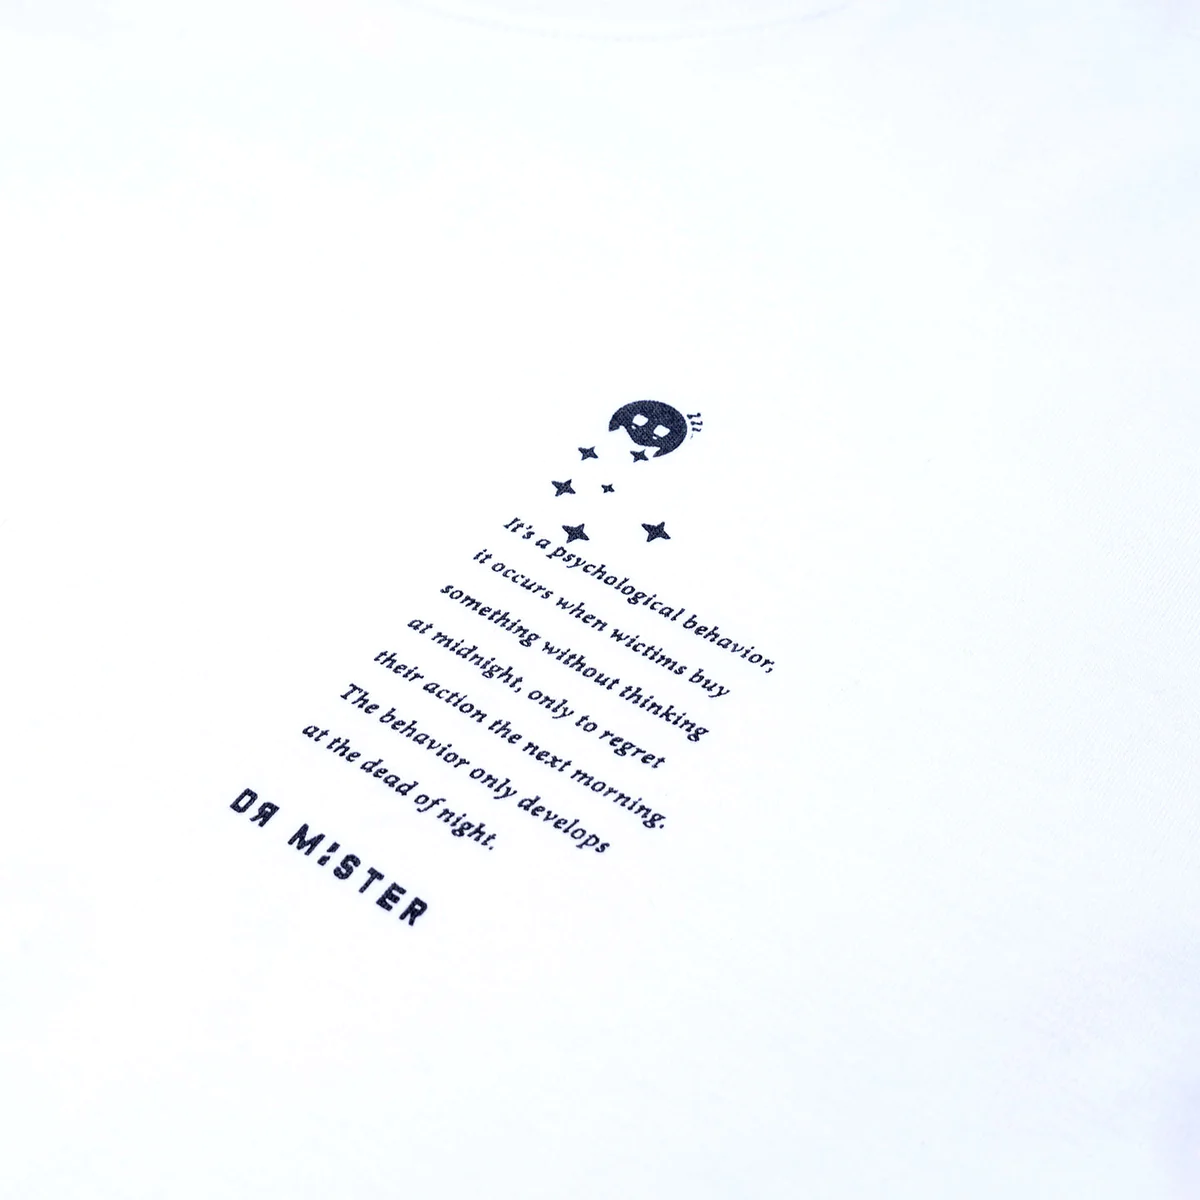 Dr Mister | Caution Oversized Tee White